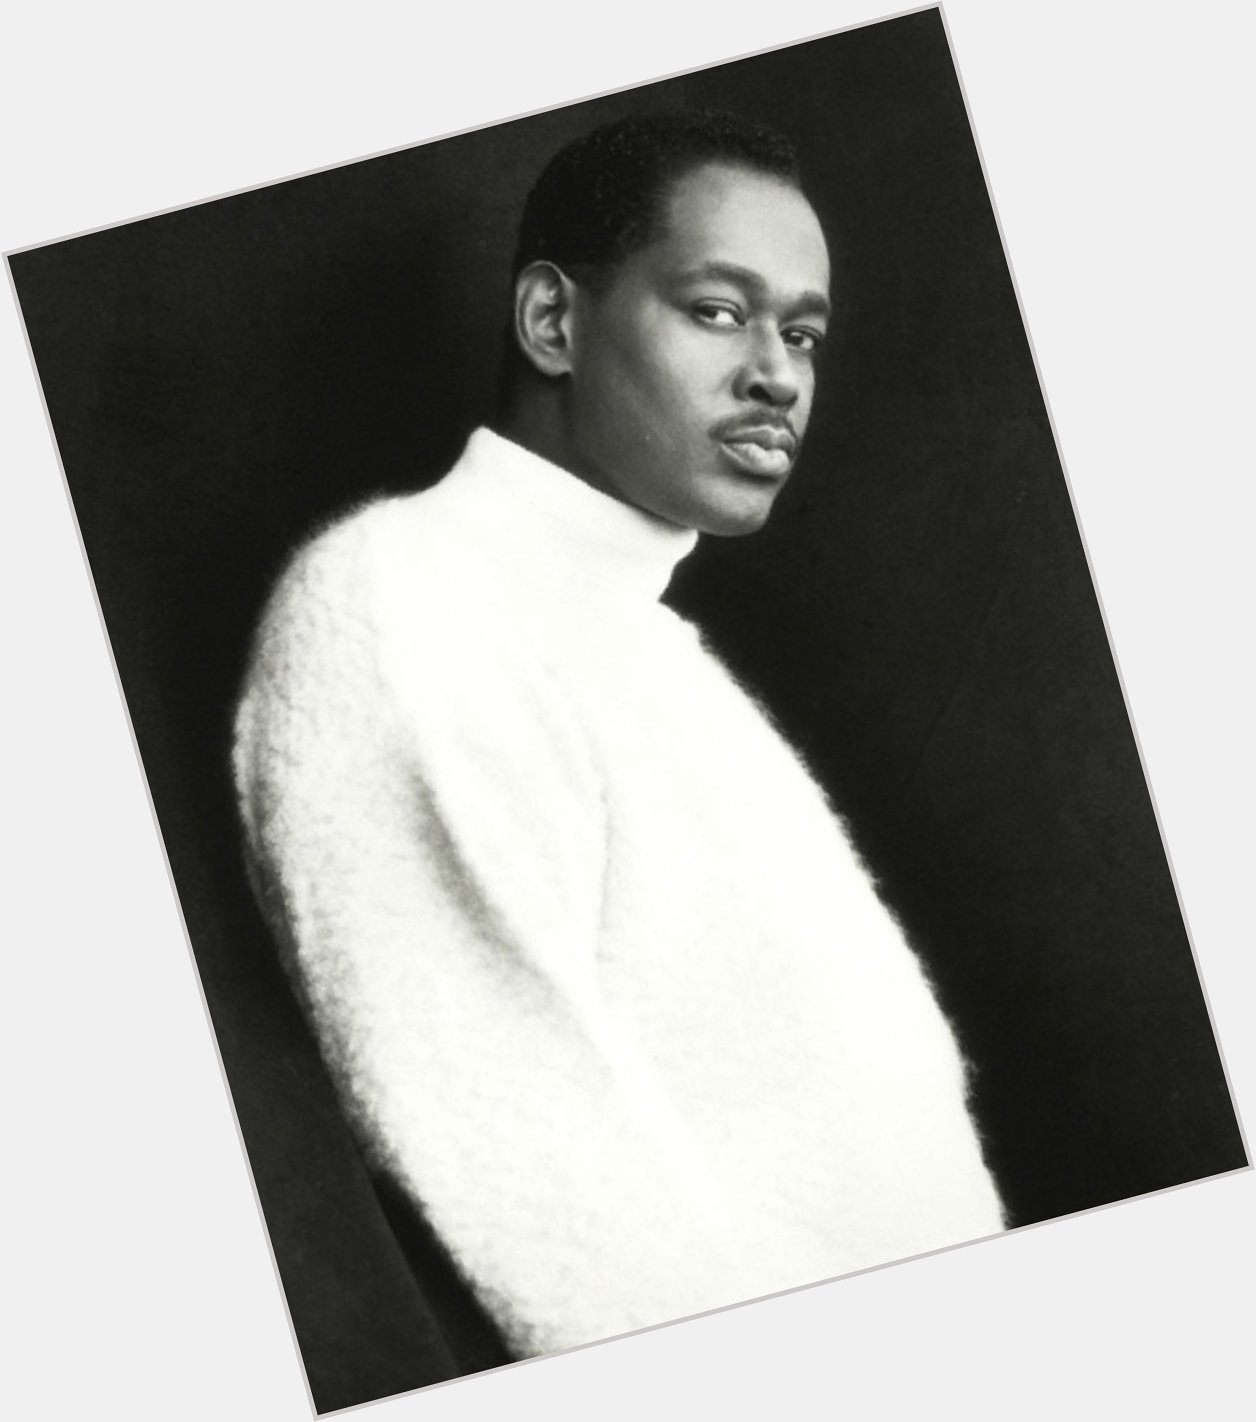 Happy  72nd Birthday to the legendary Luther Vandross. RIP 